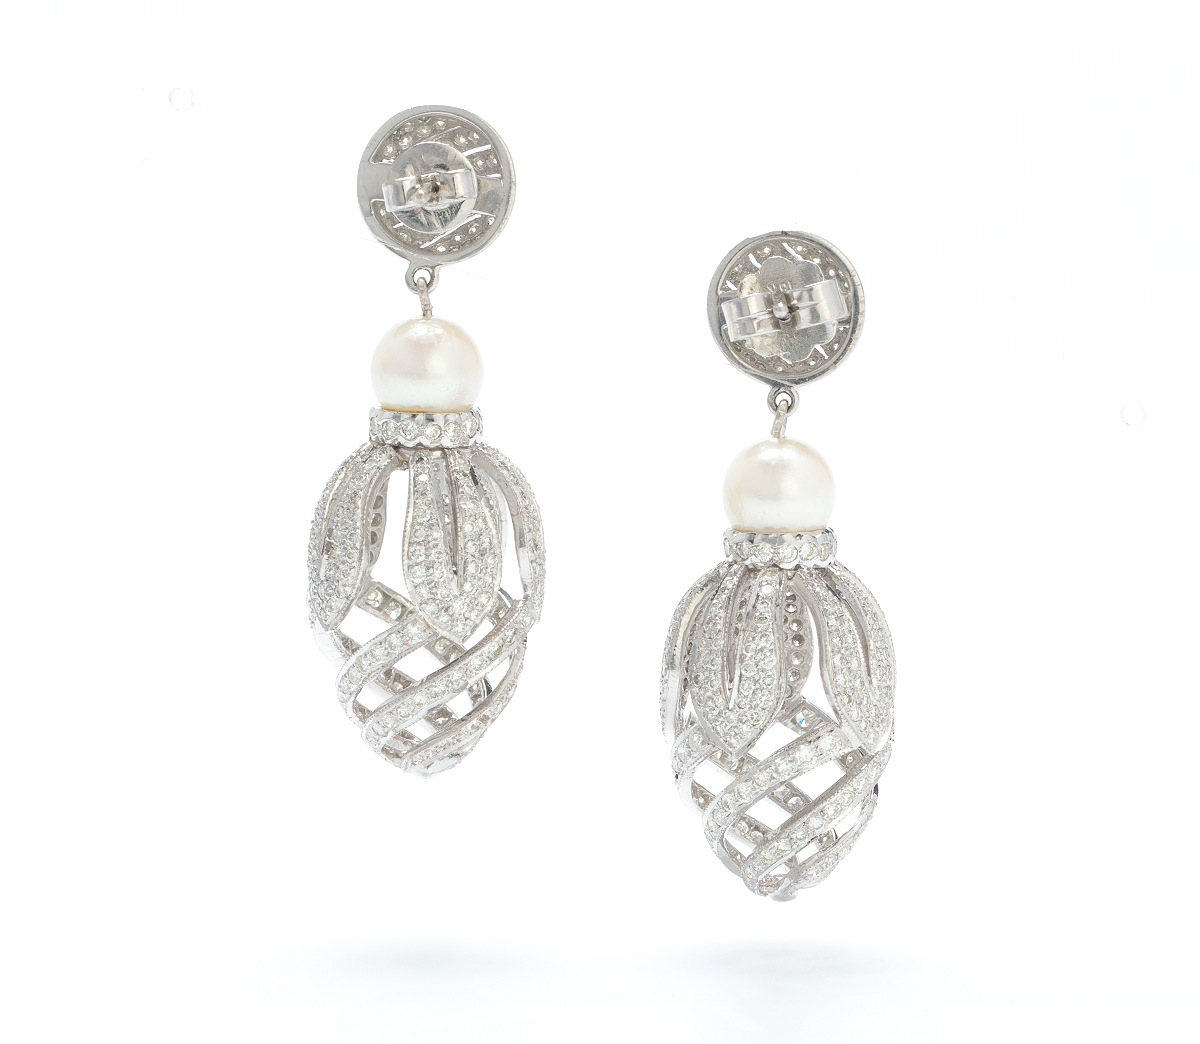 A Pair of Diamond and Pearl Pendant Earrings - Image 3 of 5